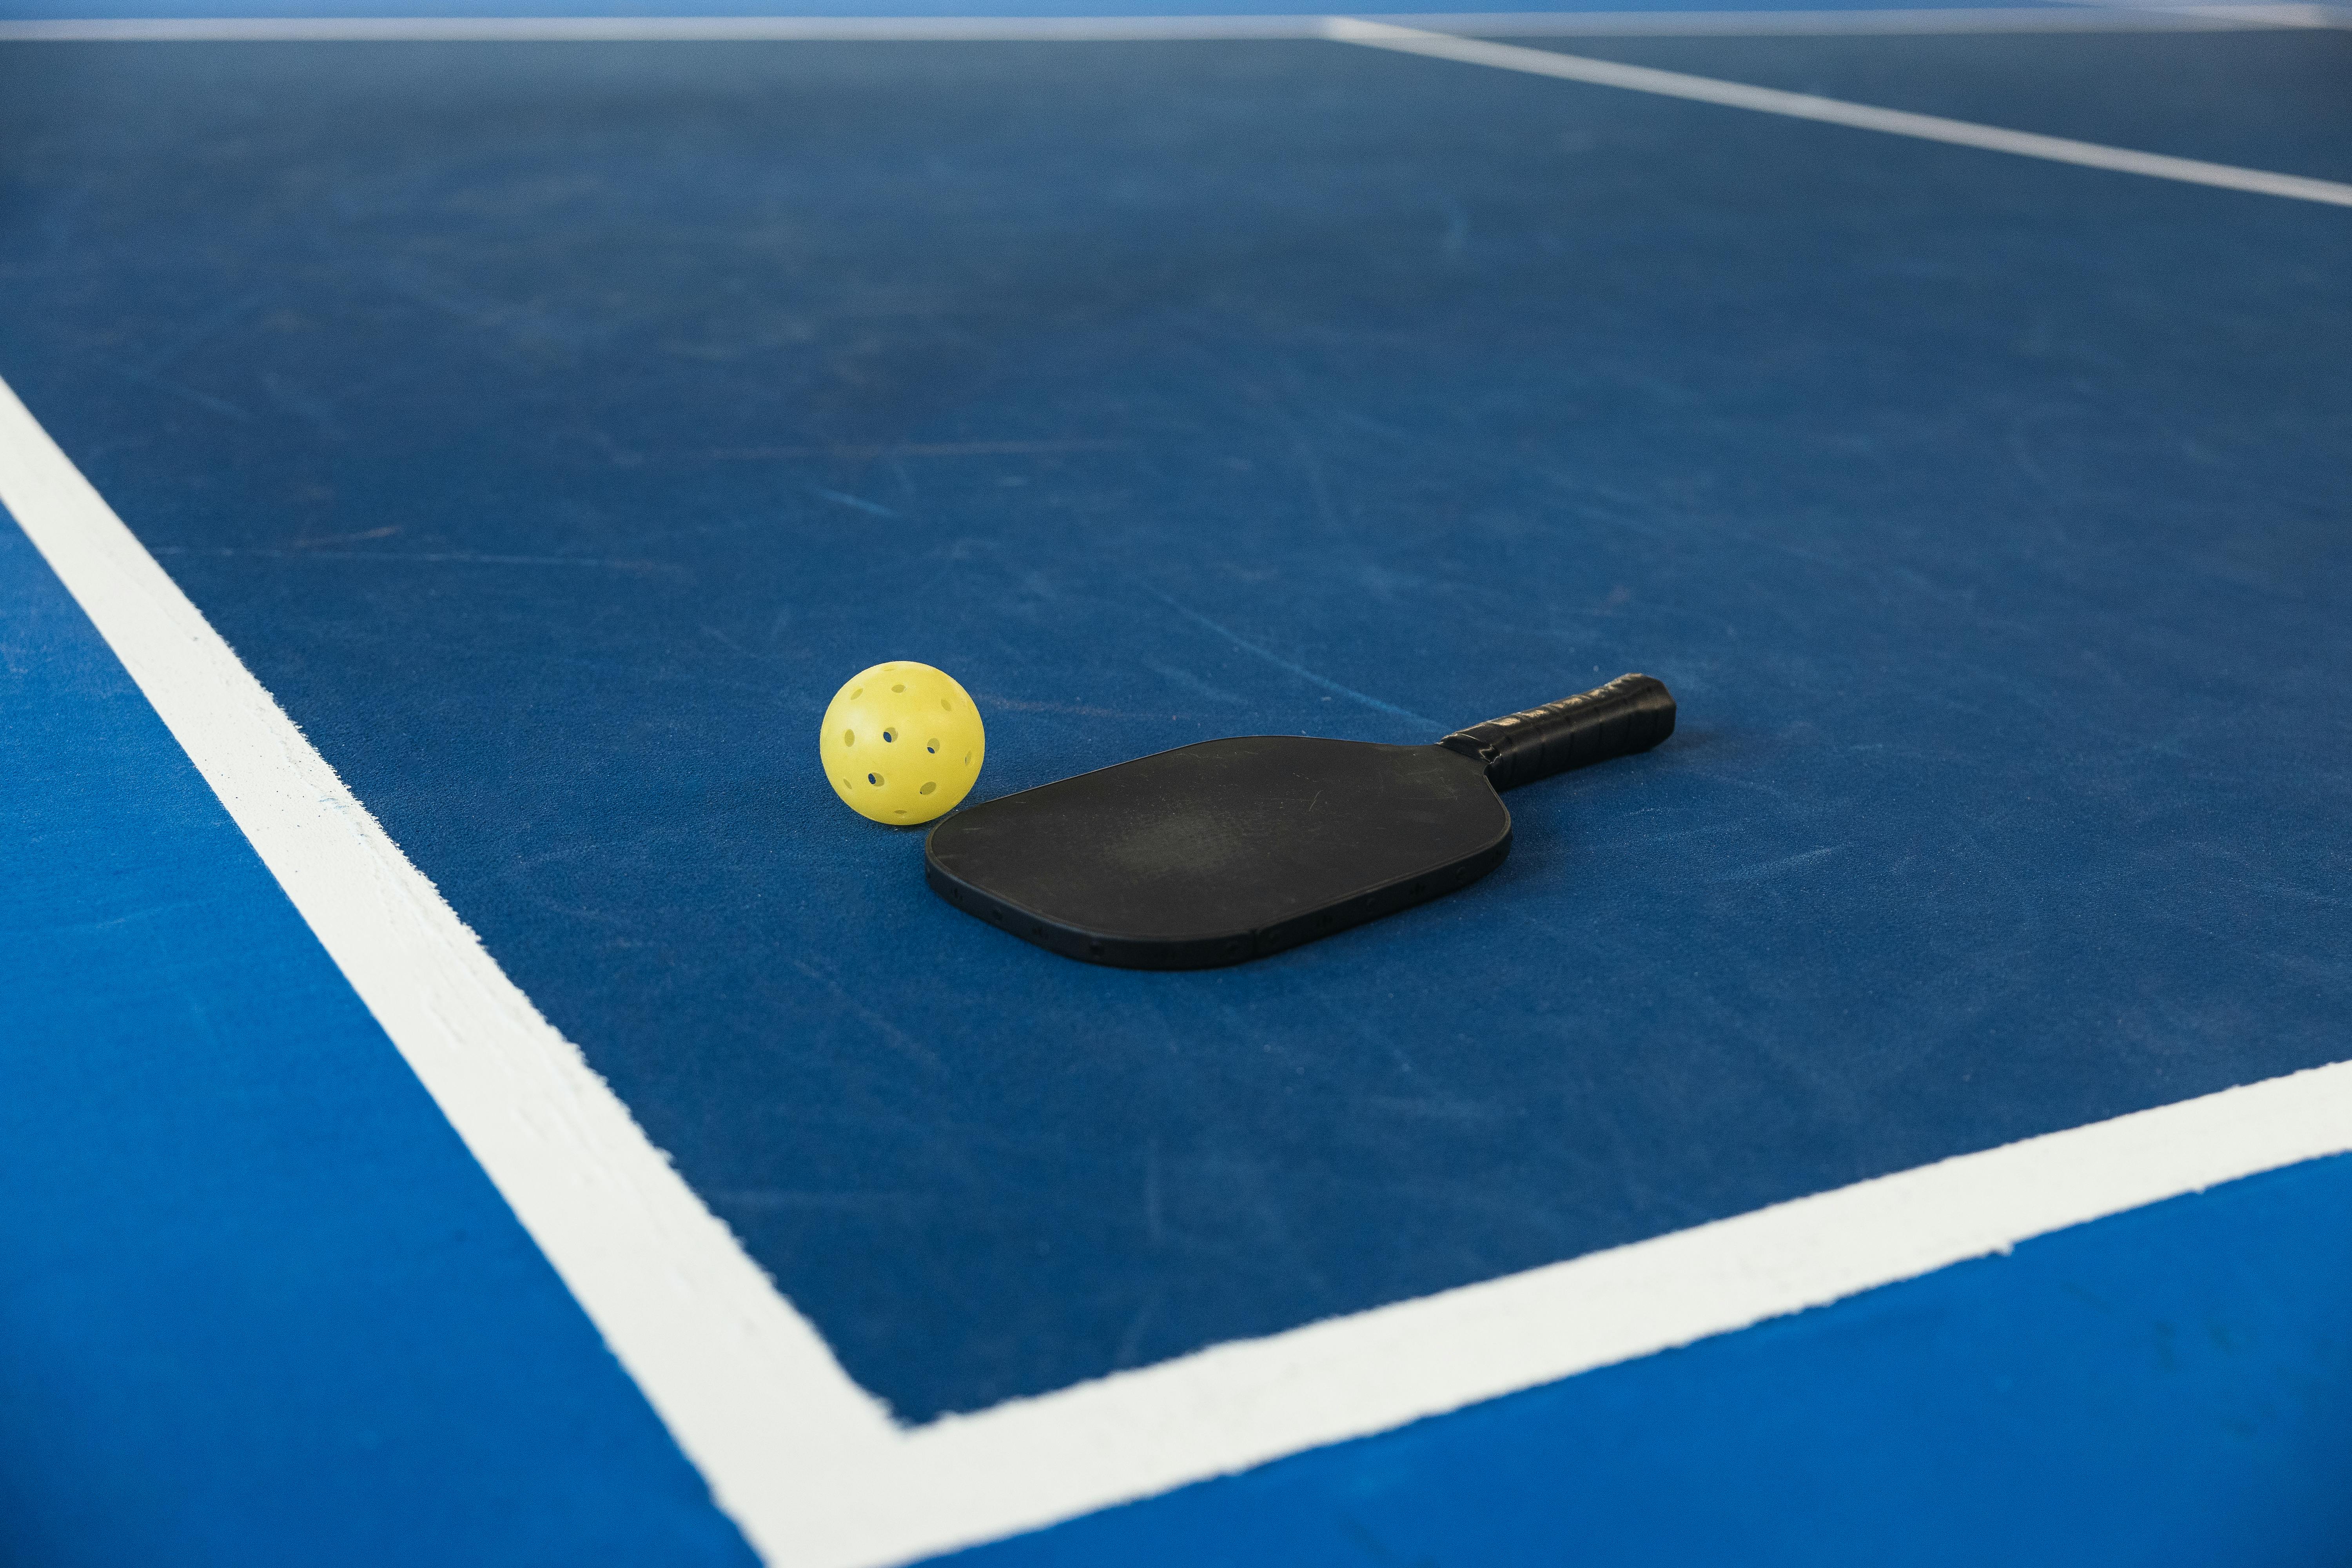 A pickleball paddle and ball on a pickleball court